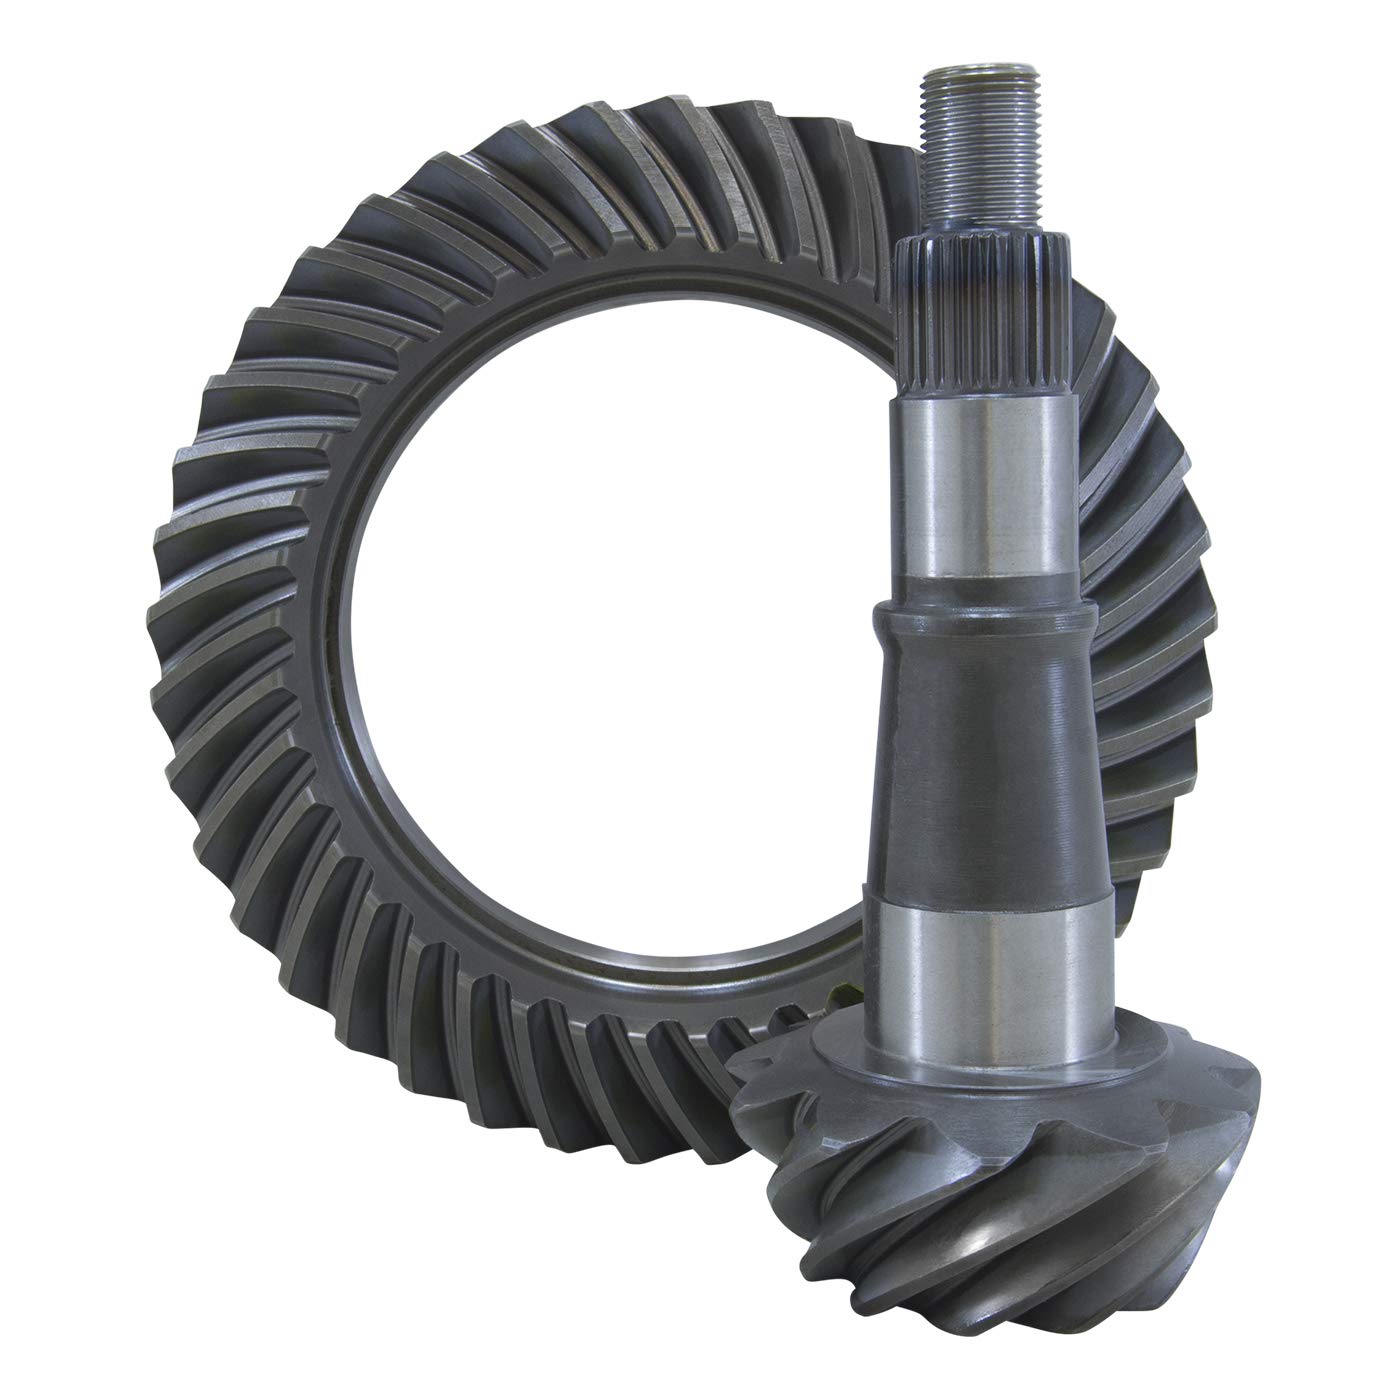 HIGH PERFORMANCE YUKON RING & PINION GEAR SET FOR CHRYLSER 9.25IN FRONT IN A 3.7